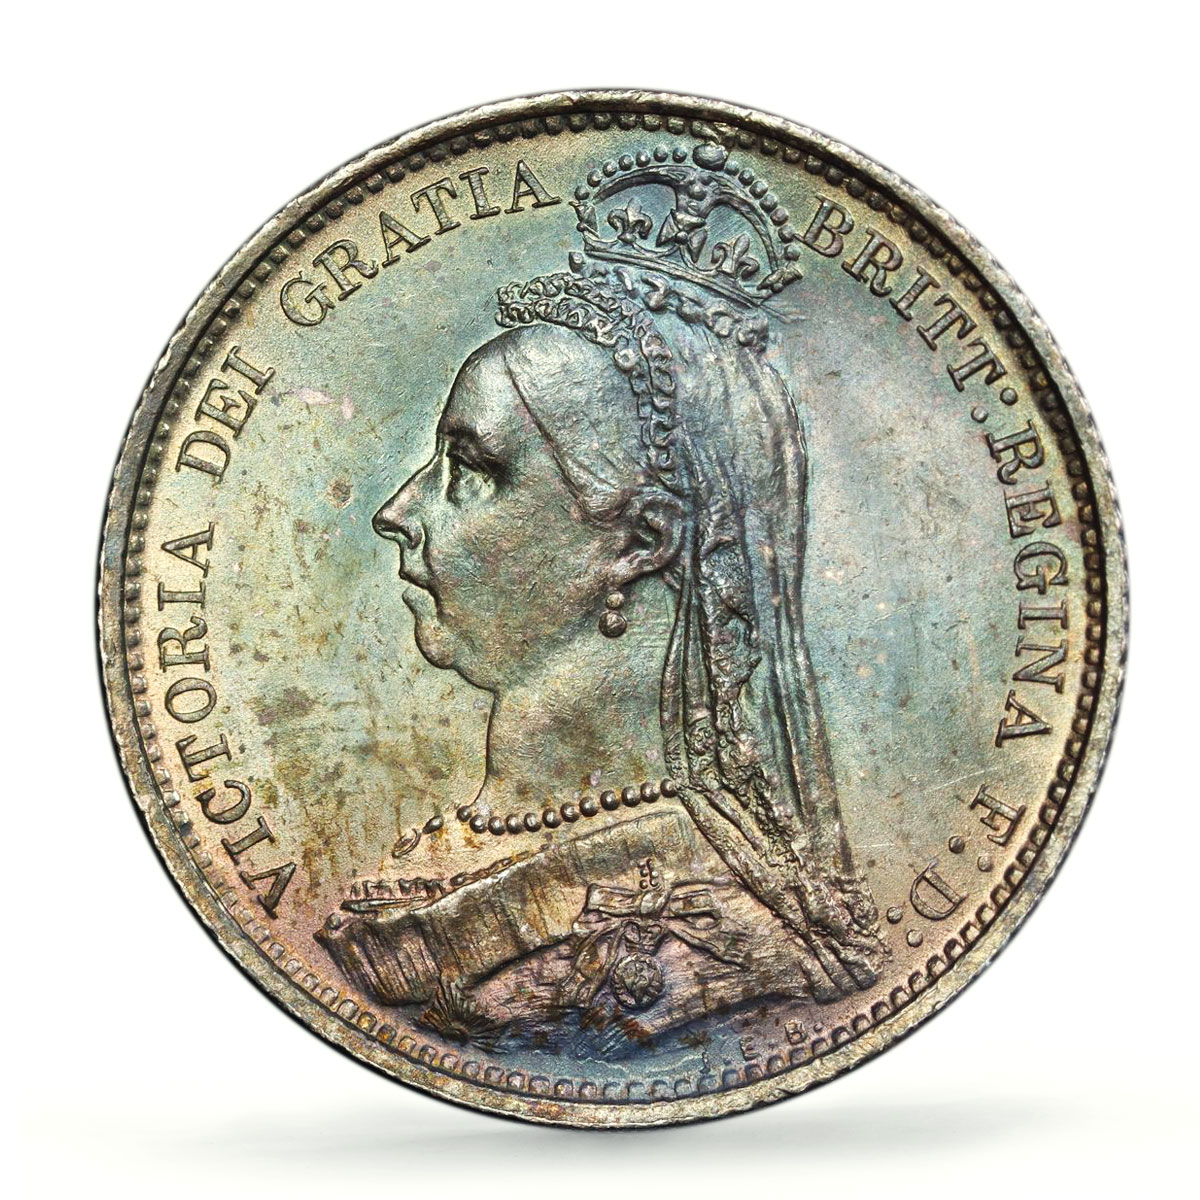 Great Britain 6 pence Regular Coinage Queen Victoria MS64 PCGS silver coin 1887